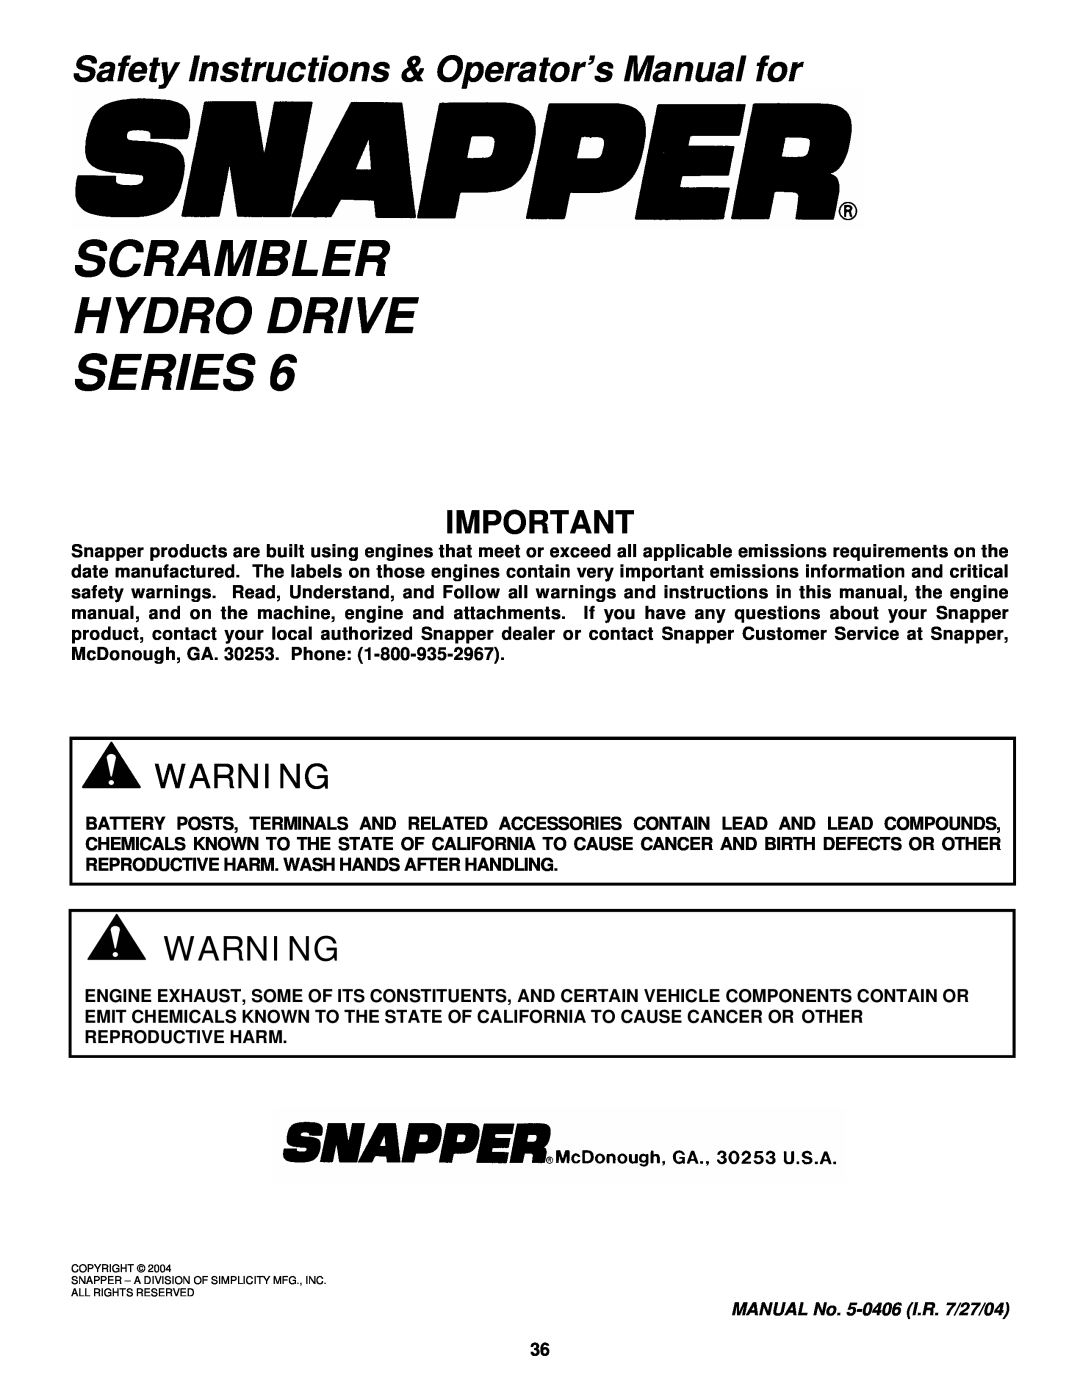 Snapper YZ18426BVE, YZ20486BVE Scrambler Hydro Drive Series, Safety Instructions & Operator’s Manual for 